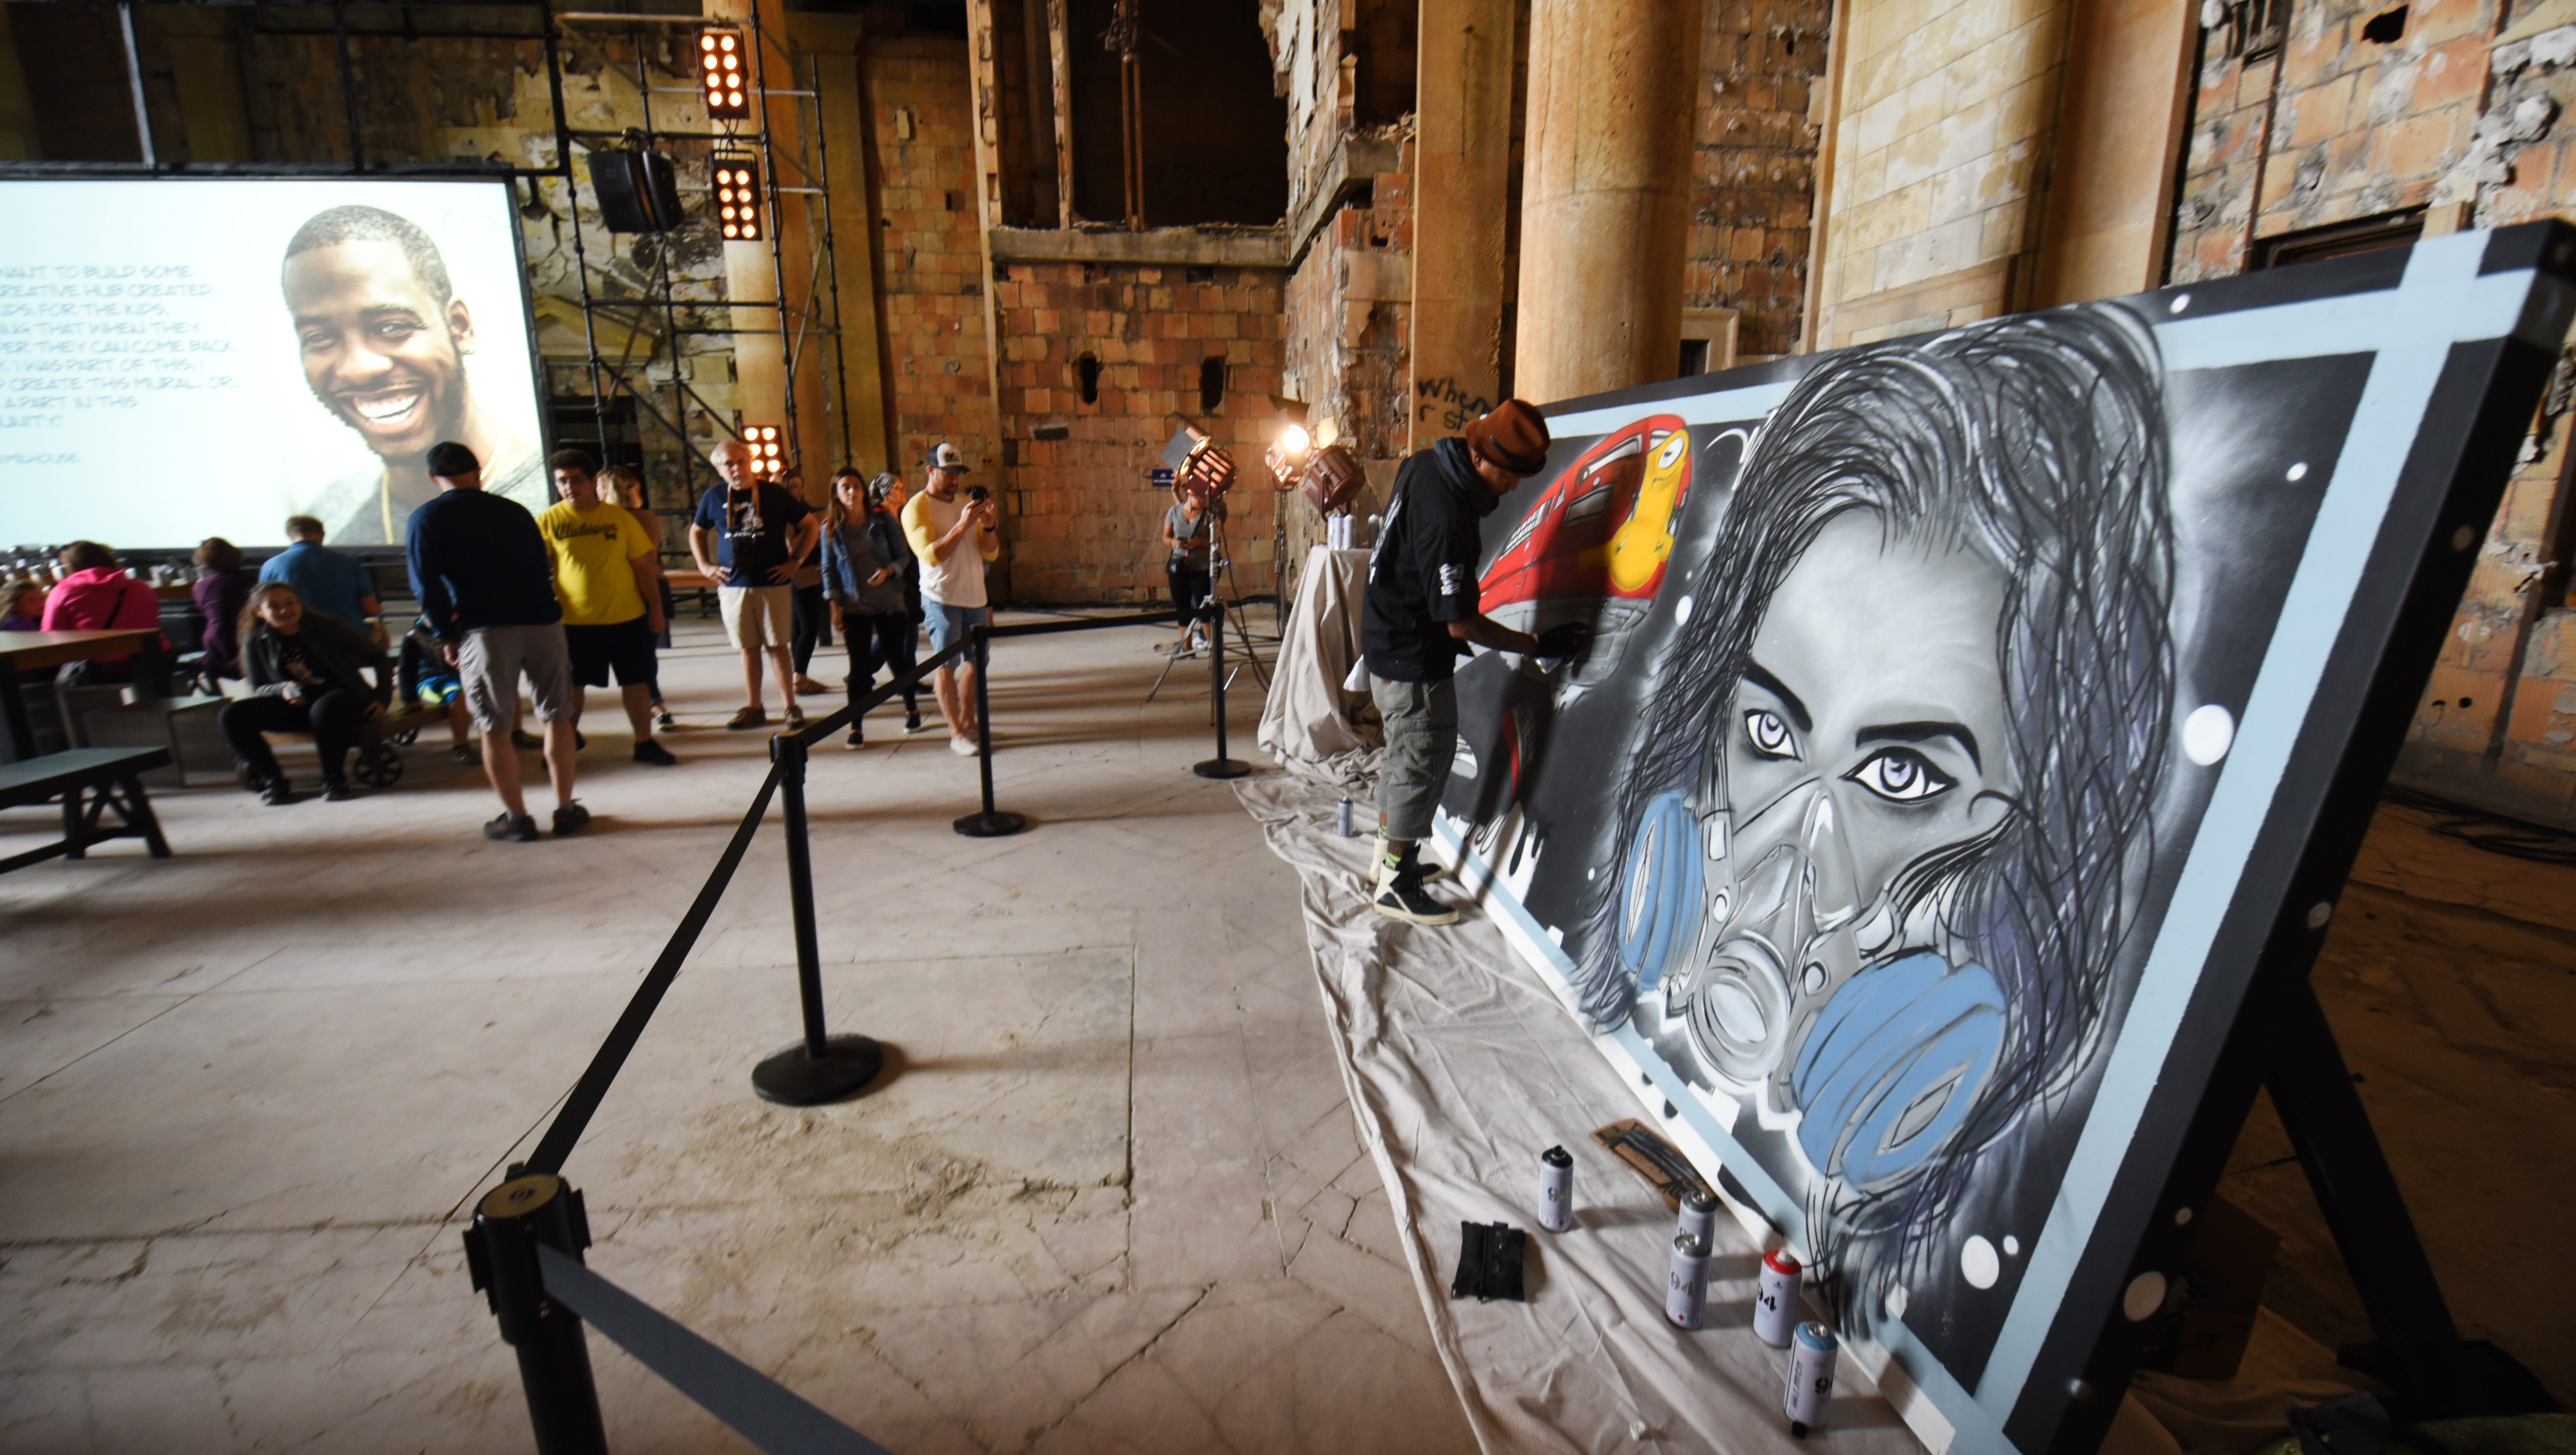 Detroit artist Antonio "shades" Agee spray-paints his latest project for the crowd at the Michigan Central Train Depot.